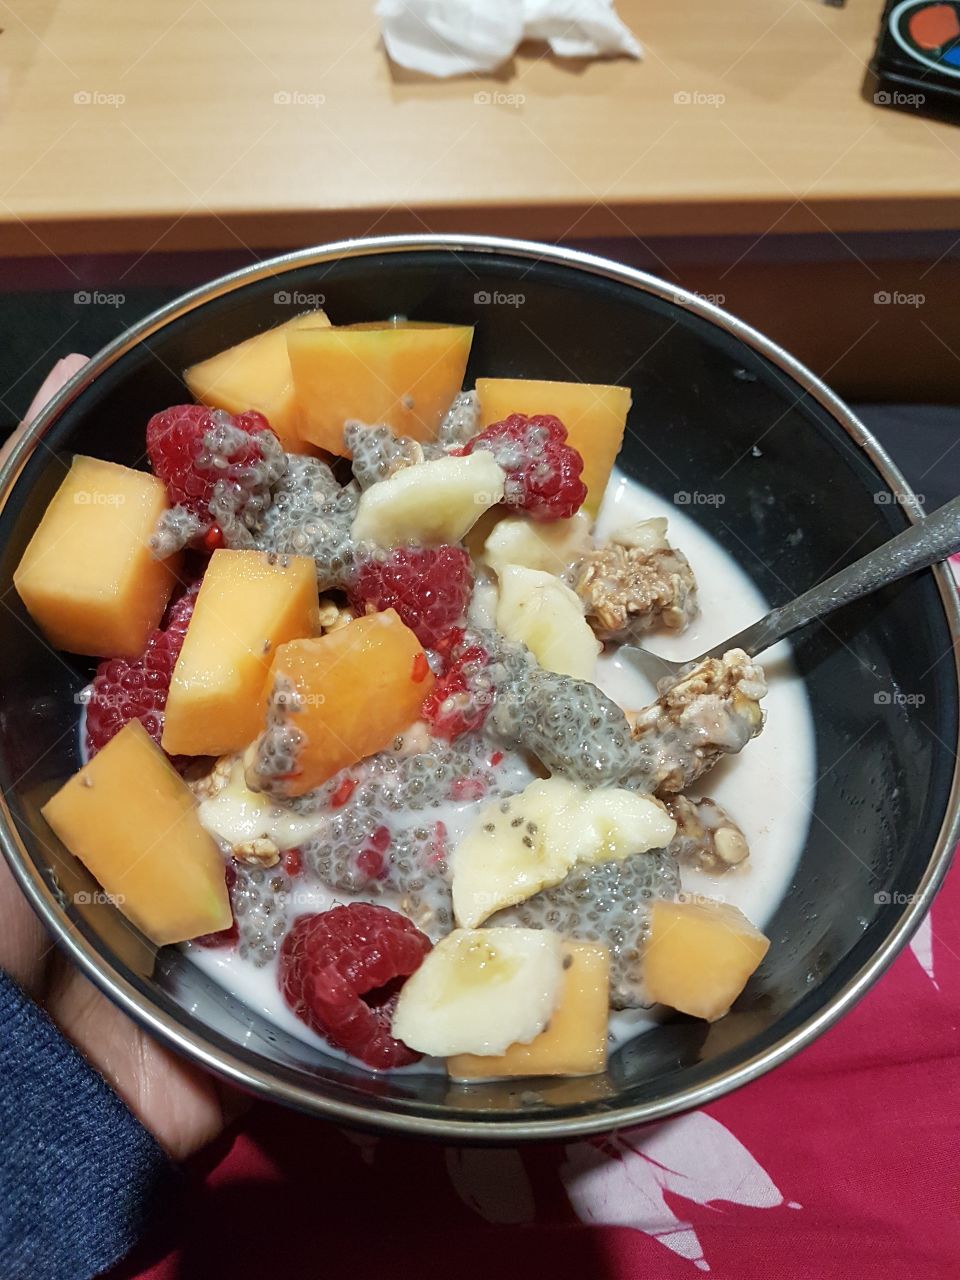 Fruit bowl with chia seeds 😍